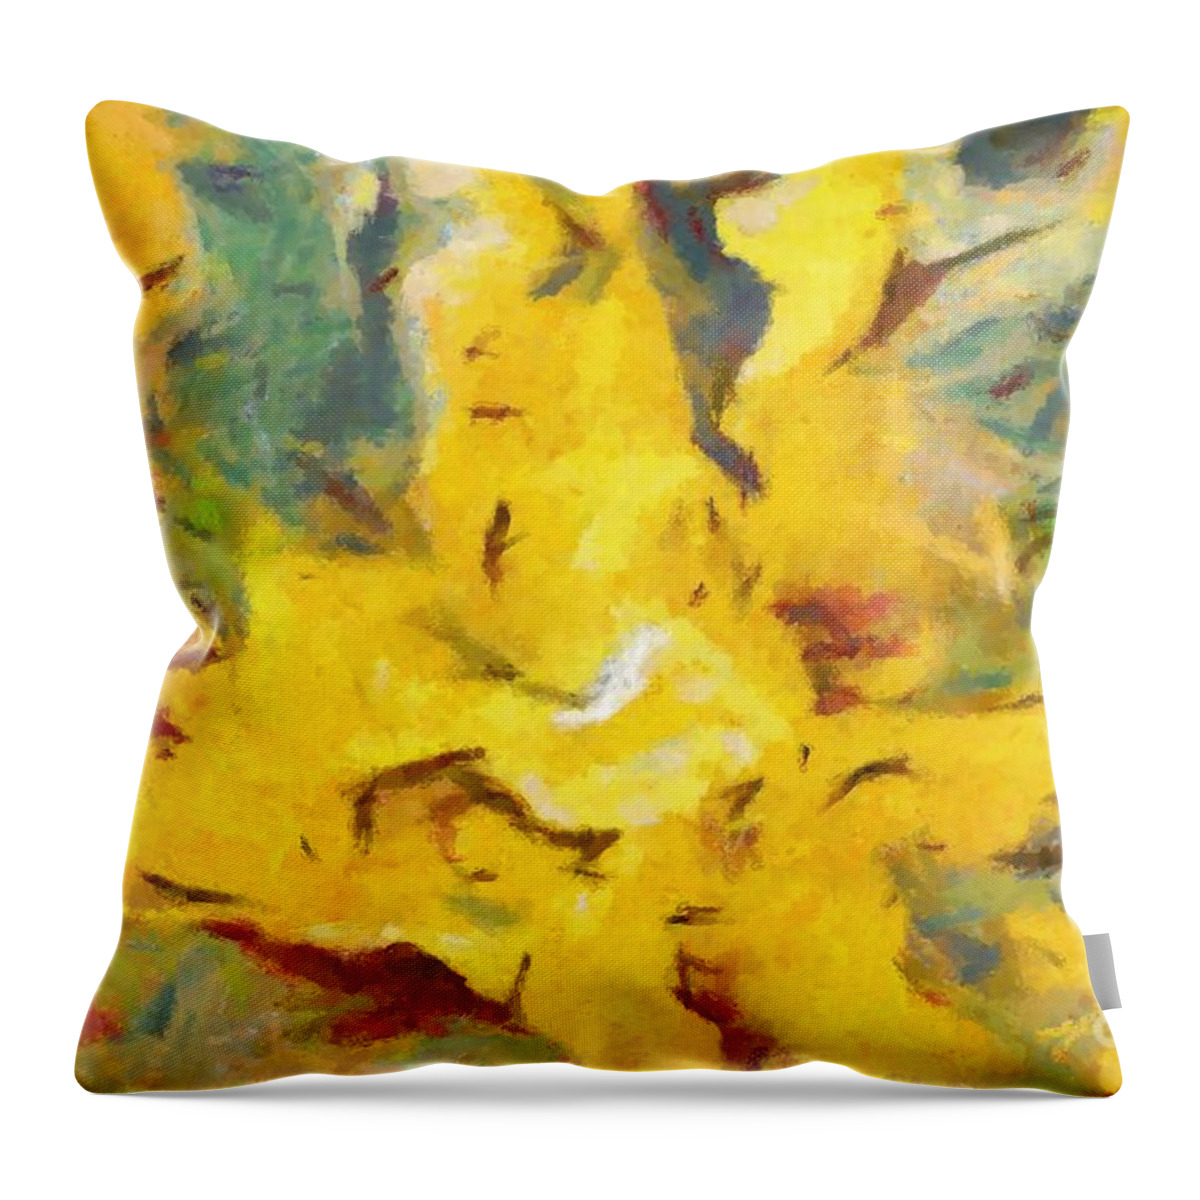 Savanna Throw Pillow featuring the painting Abstract Savanna Colors by Stefano Senise